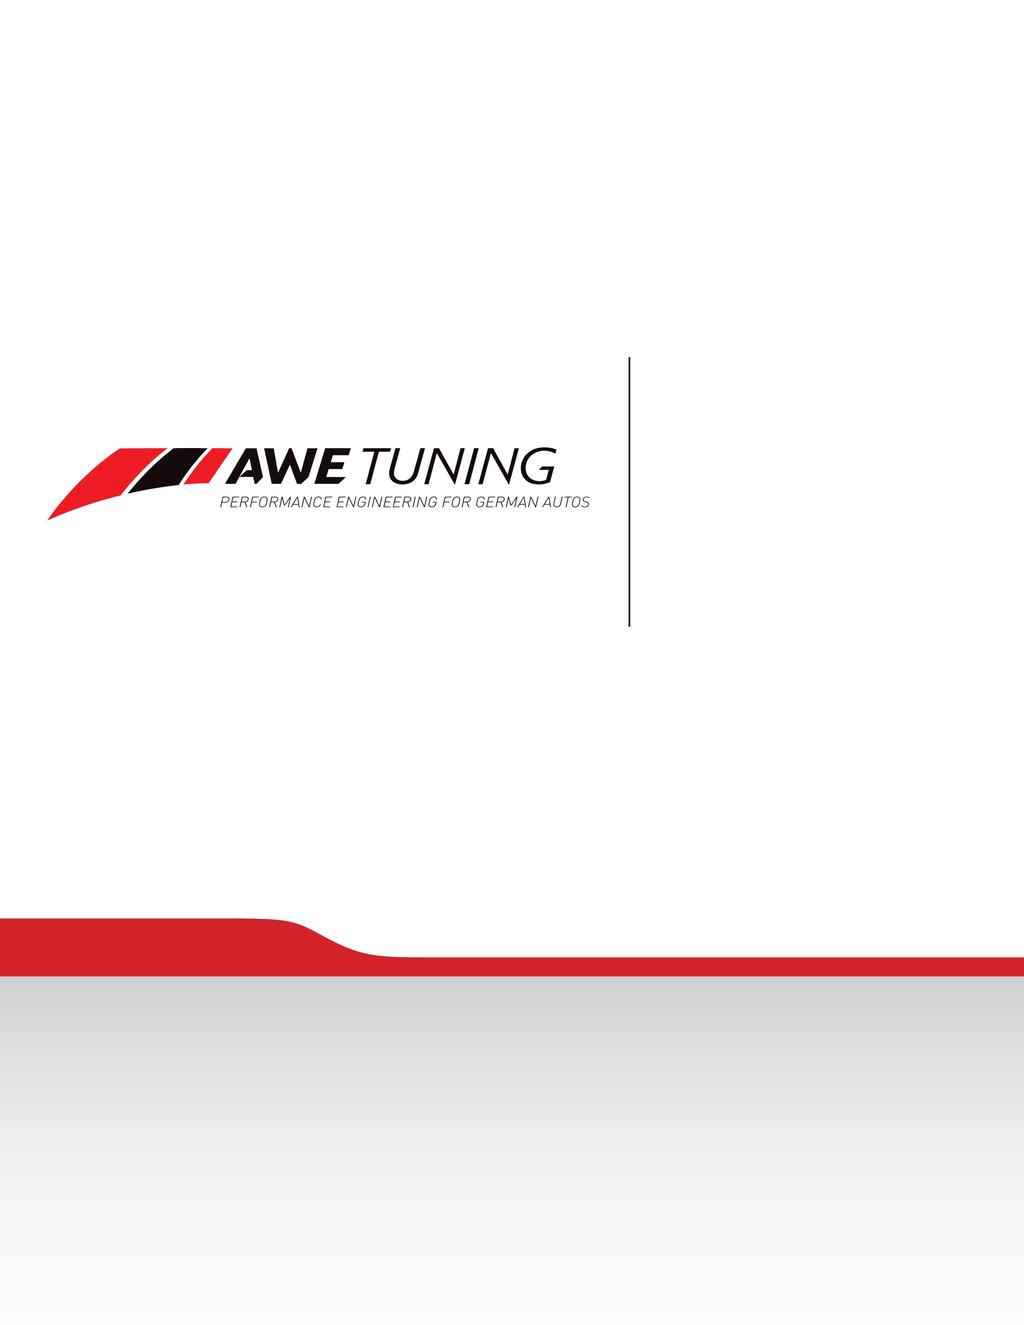 INSTALLATION GUIDE Congratulations on your purchase of the AWE Tuning Front Mount Intercooler for